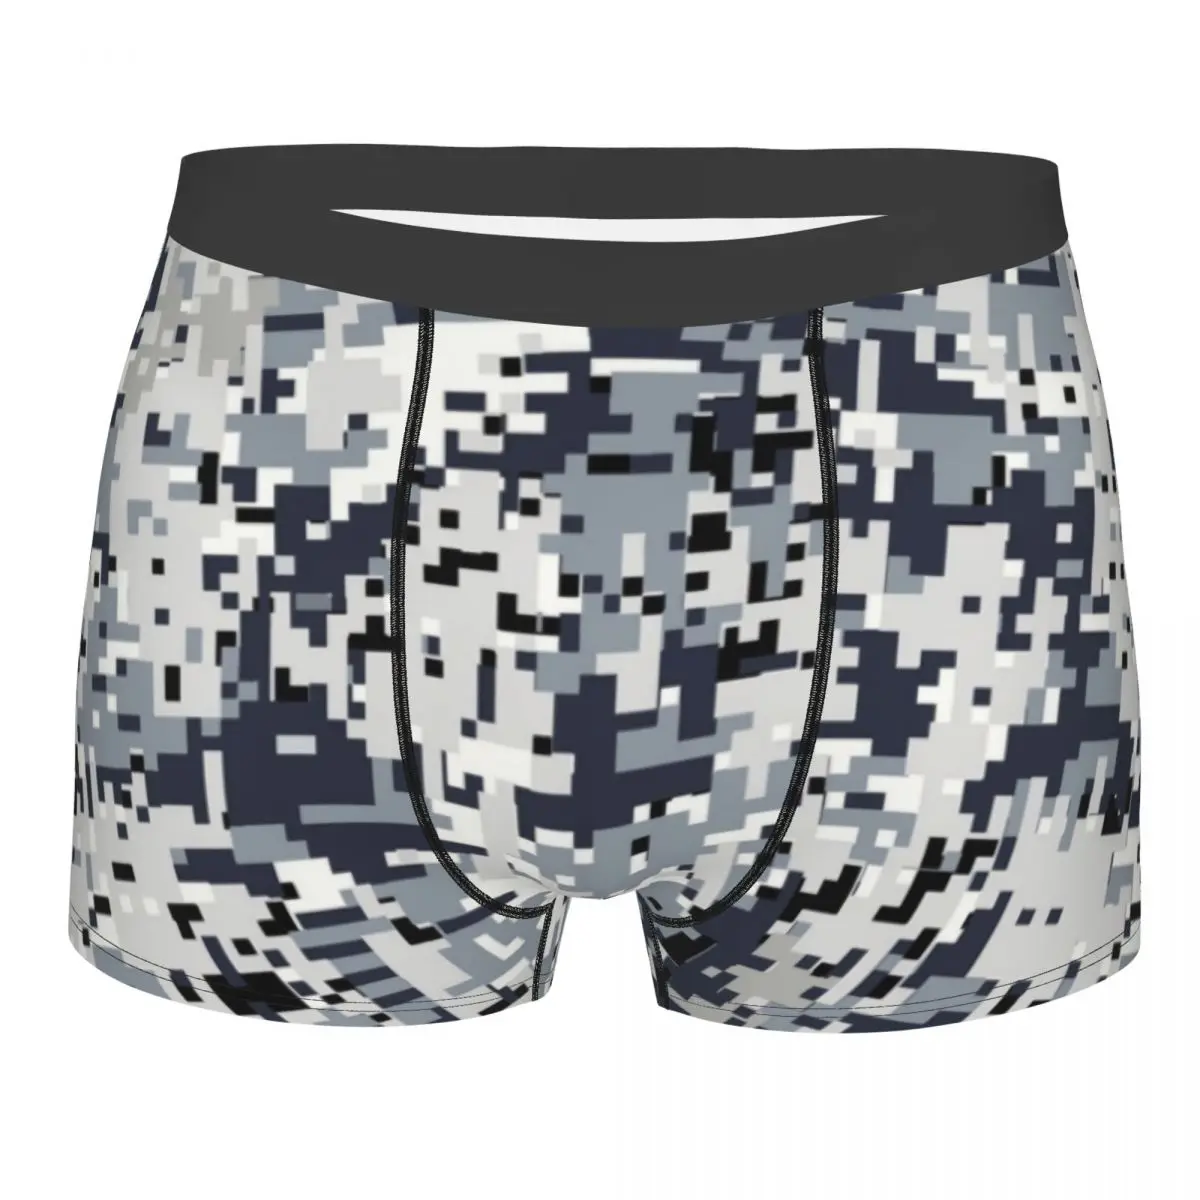 

Urban Style Digital Camo Boxer Shorts For Men 3D Printed Army Tactical Camouflage Underwear Panties Briefs Stretch Underpants